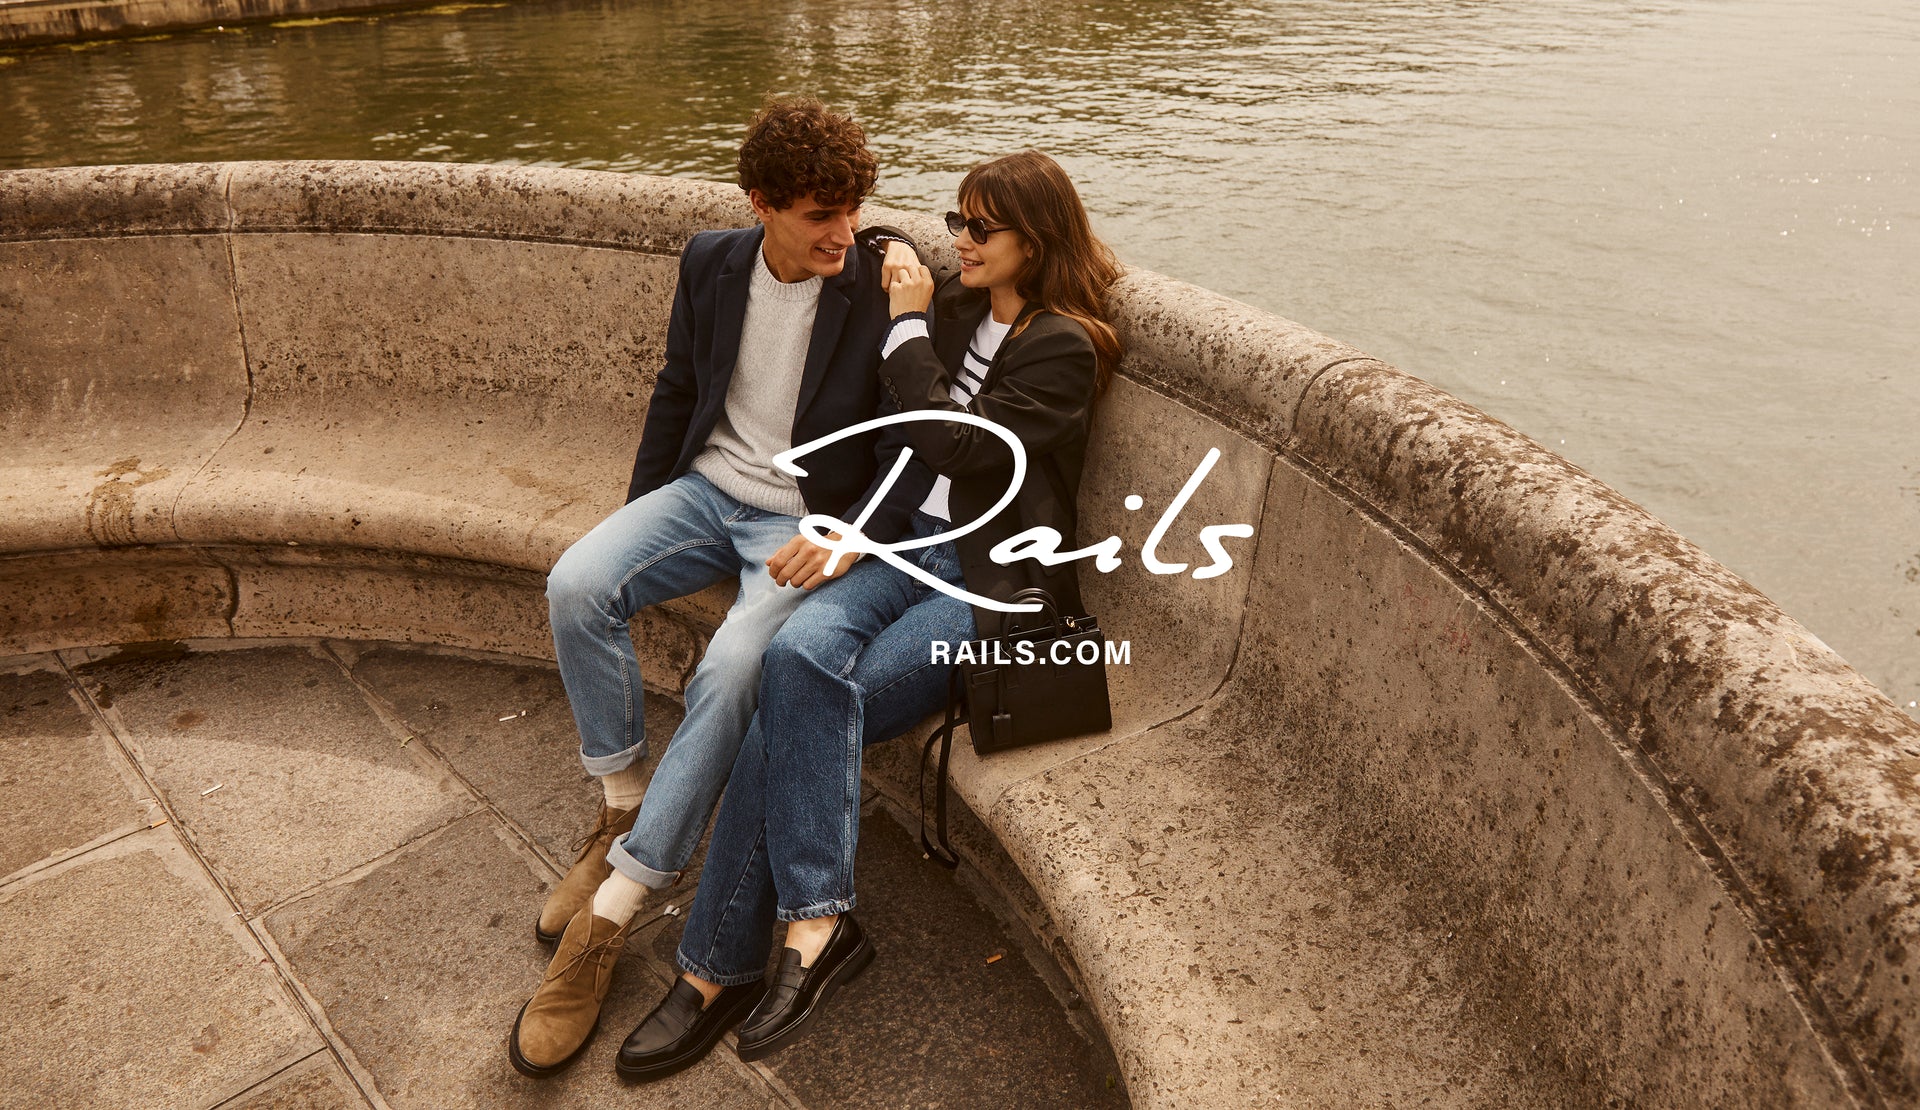 EDITORIAL IMAGE OF TWO MODELS SITTING OUTSIDE. FIRST MODEL IS WEARING LARK COAT, DONOVAN SWEATER, AND CLAYTON SLIM STRAIGHT JEANS. SECOND MODEL IS WEARING JAC BLAZER, GEMMA SWEATER, AND TOPANGA STRAIGHT JEANS. 